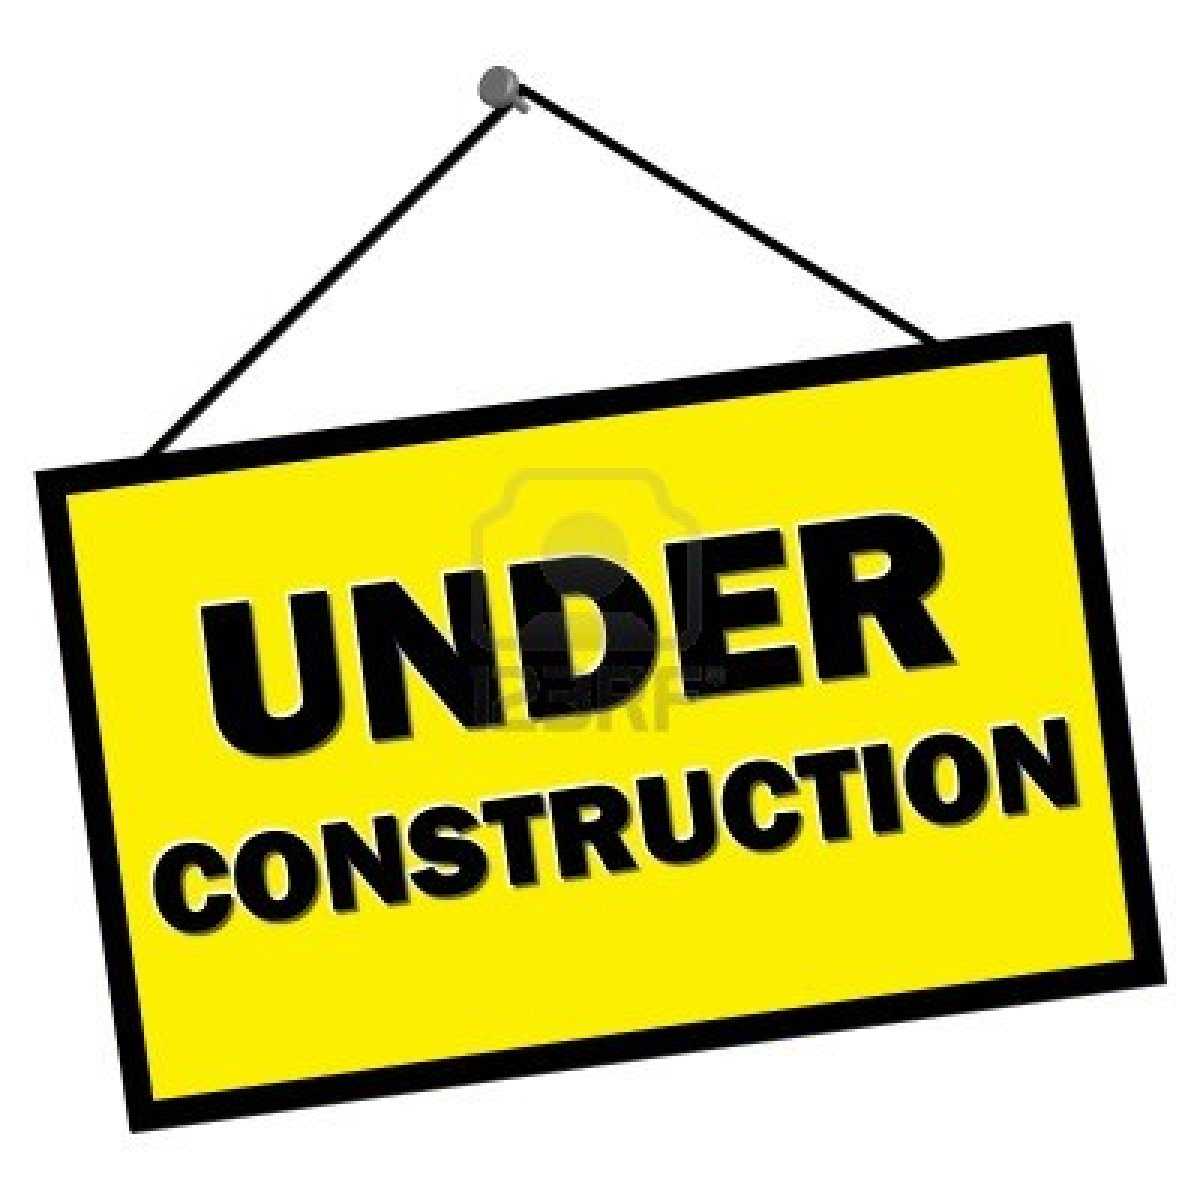 free clipart under construction - photo #24